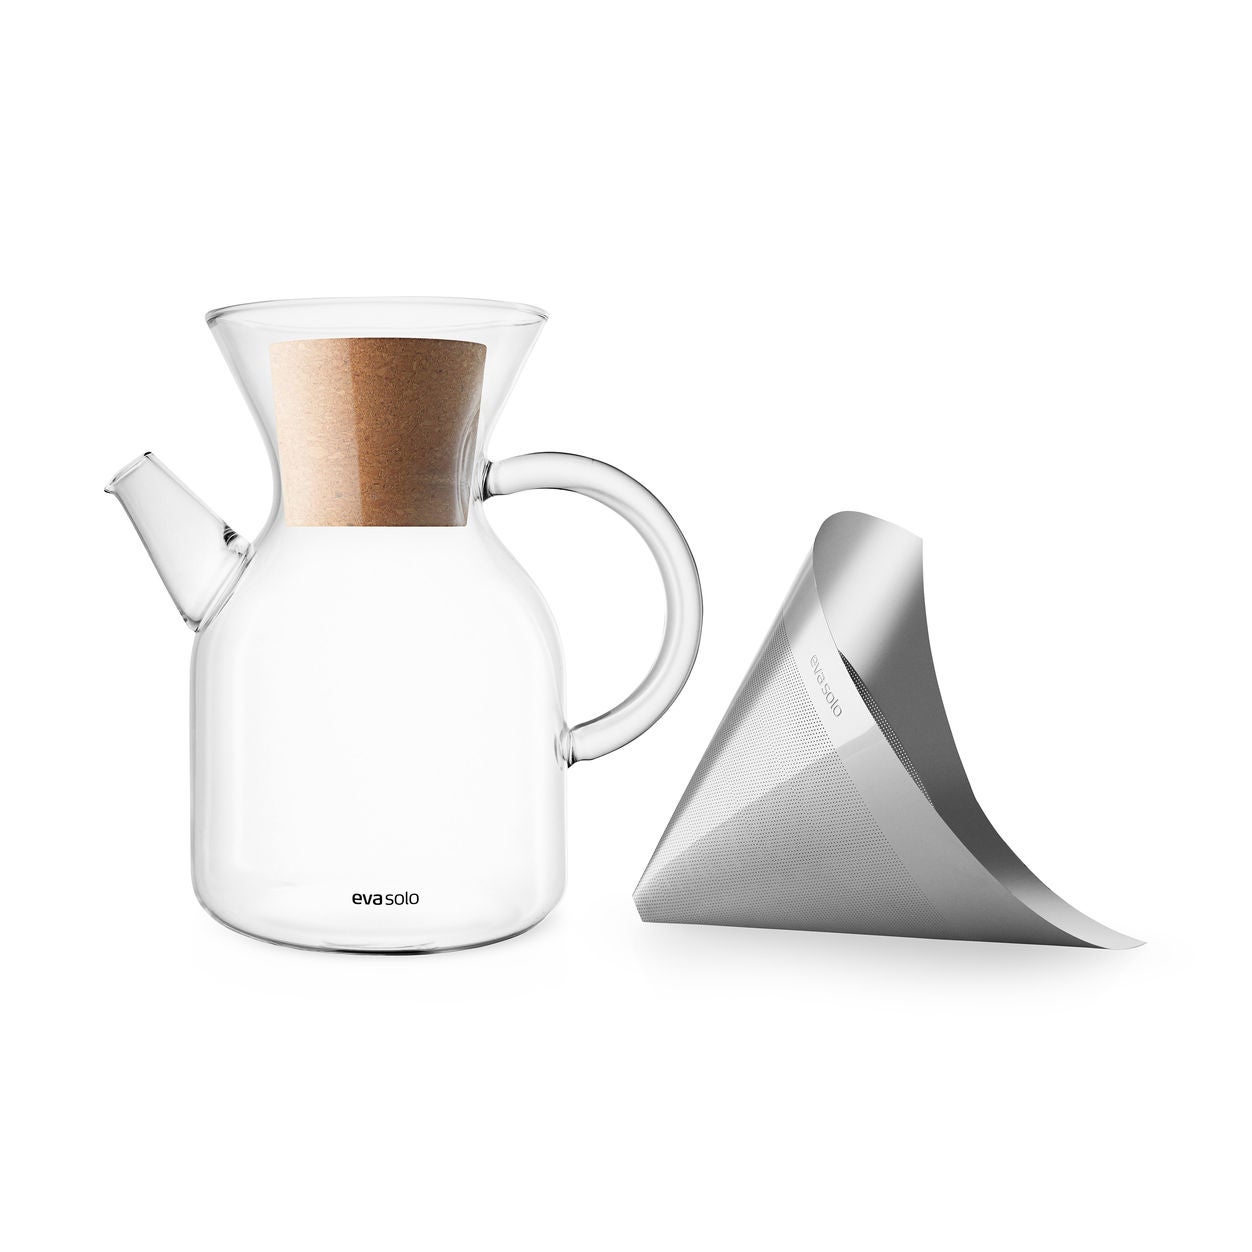 Pour-Over Coffee Maker